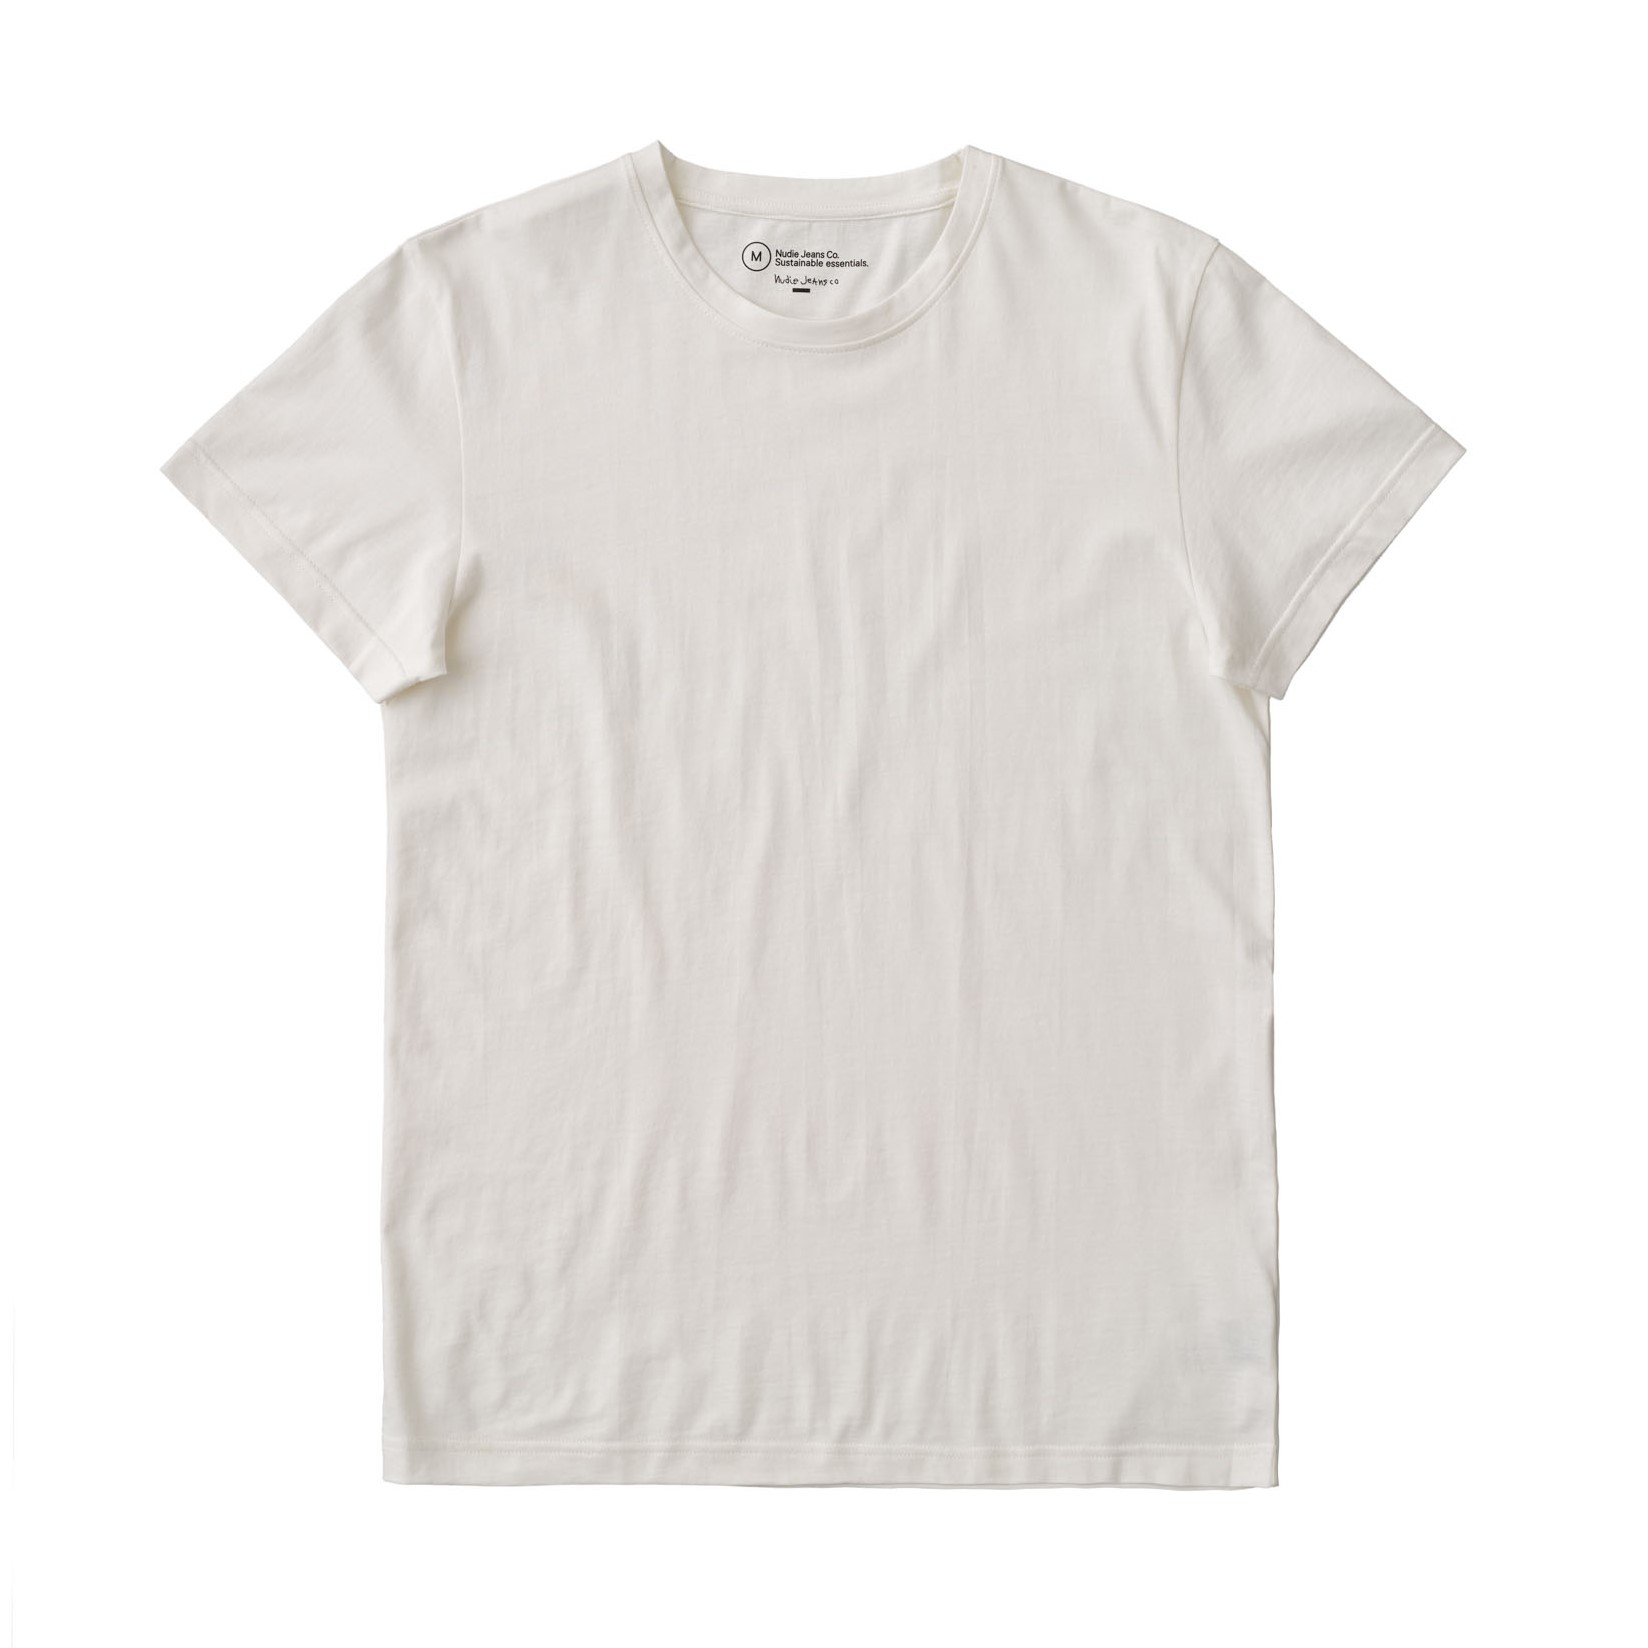 Nudie Jeans - CREW NECK TEE - Offwhite